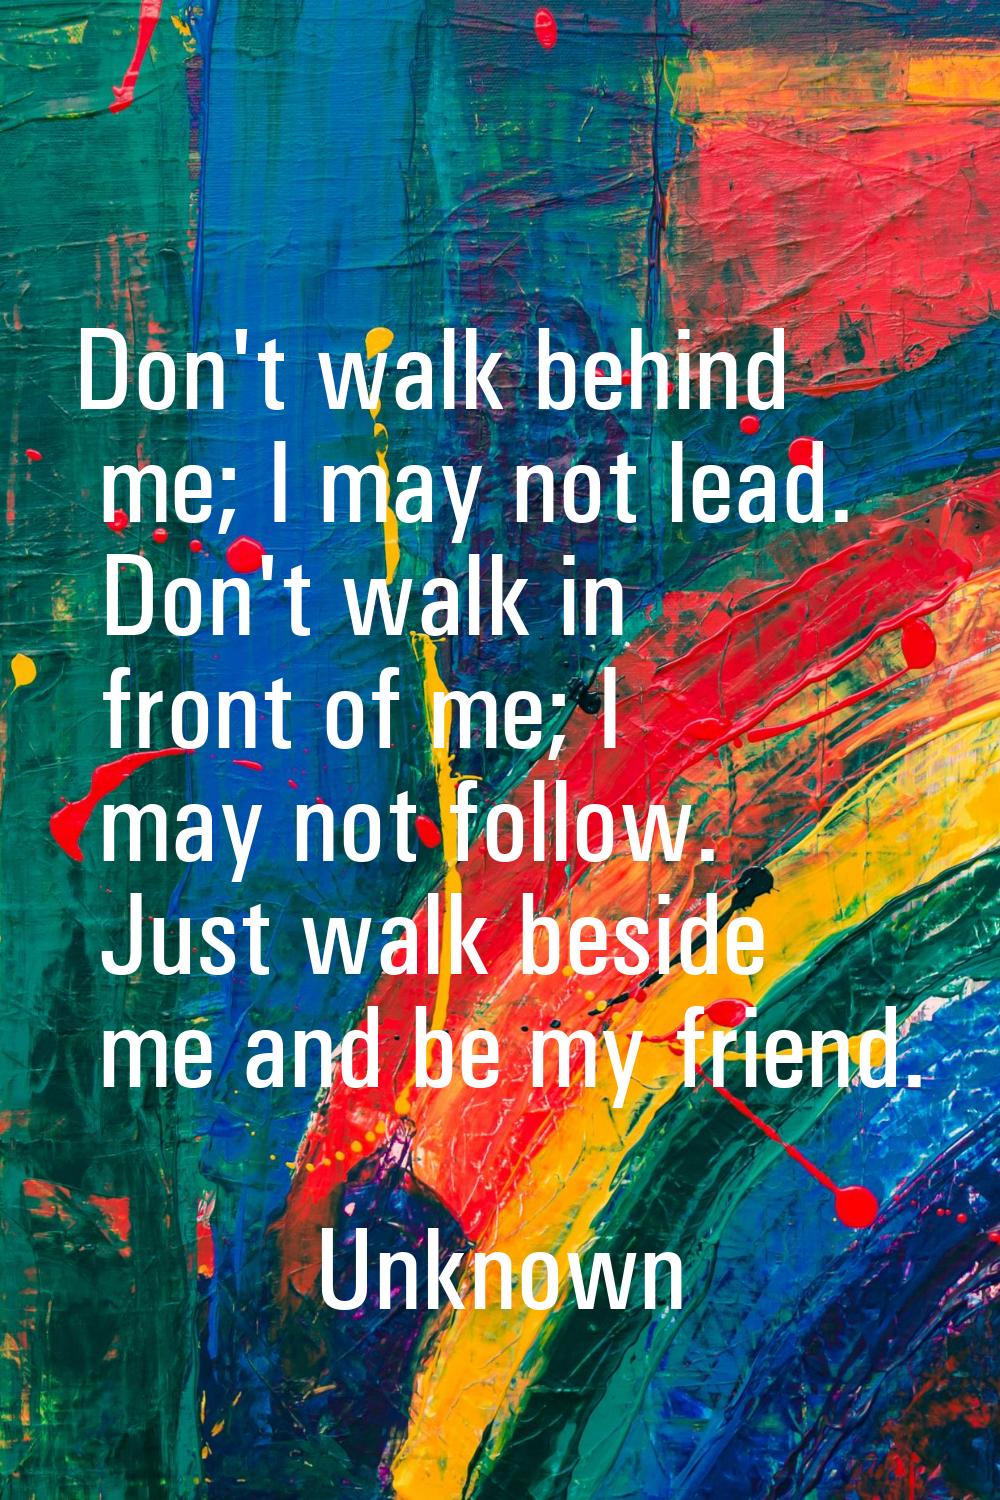 Don't walk behind me; I may not lead. Don't walk in front of me; I may not follow. Just walk beside